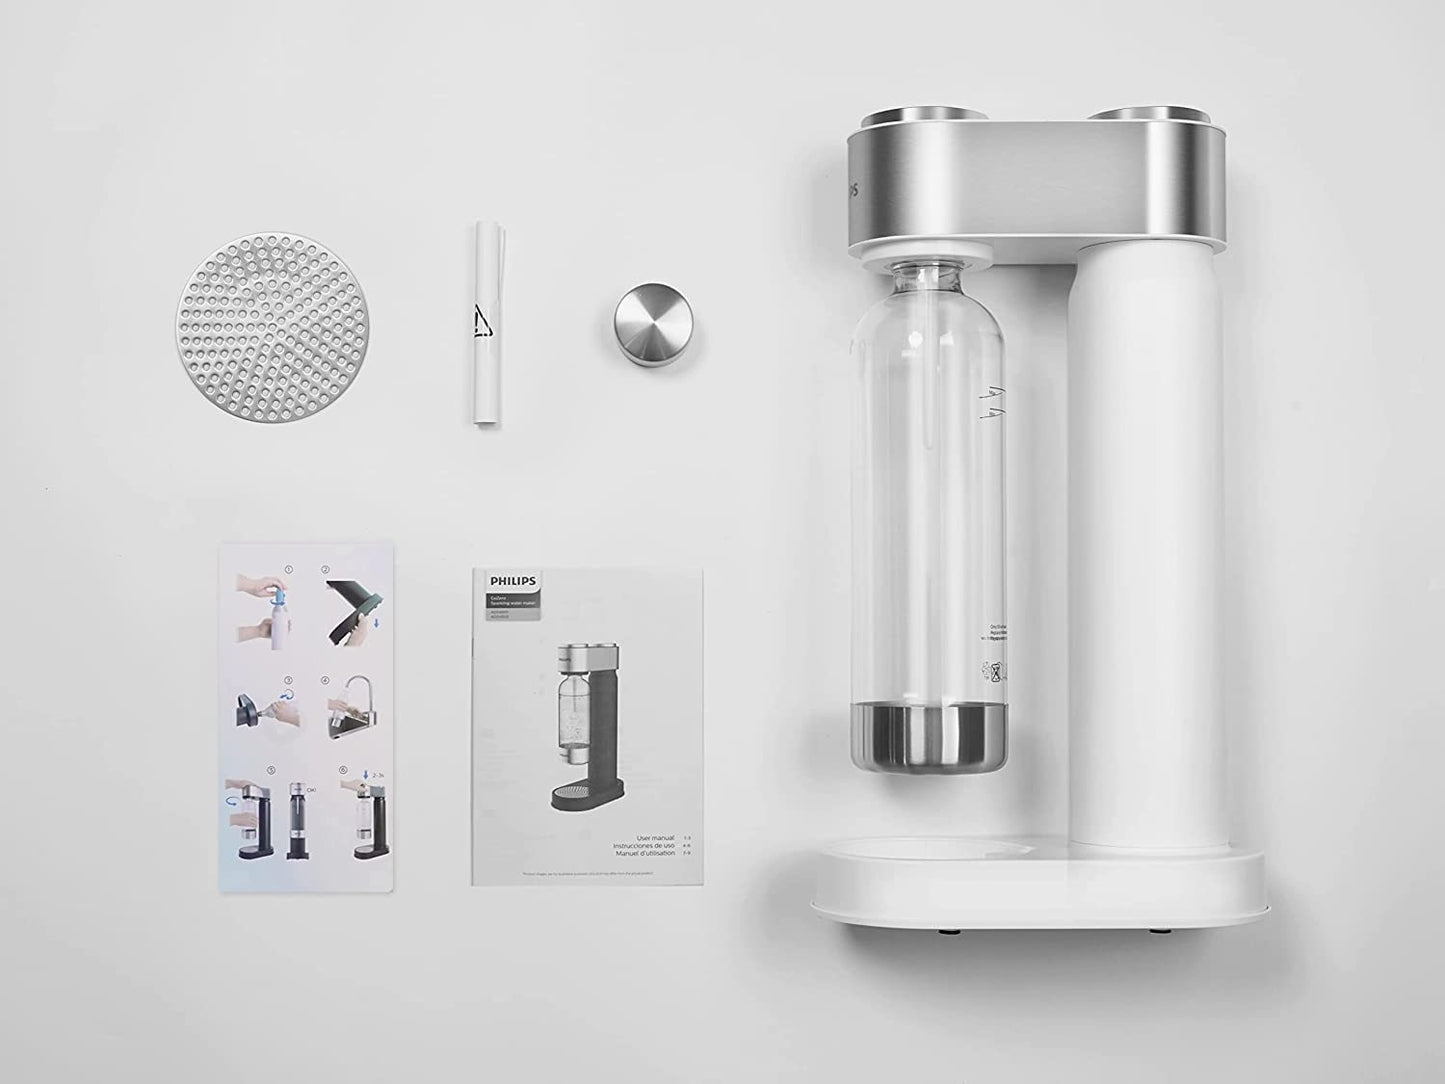 Philips Stainless Sparkling Water Maker Soda Maker Machine for Home Carbonating with BPA free PET 1L Carbonating Bottle, Compatible with Any Screw-in 60L CO2 Exchange Carbonator(NOT Included), White